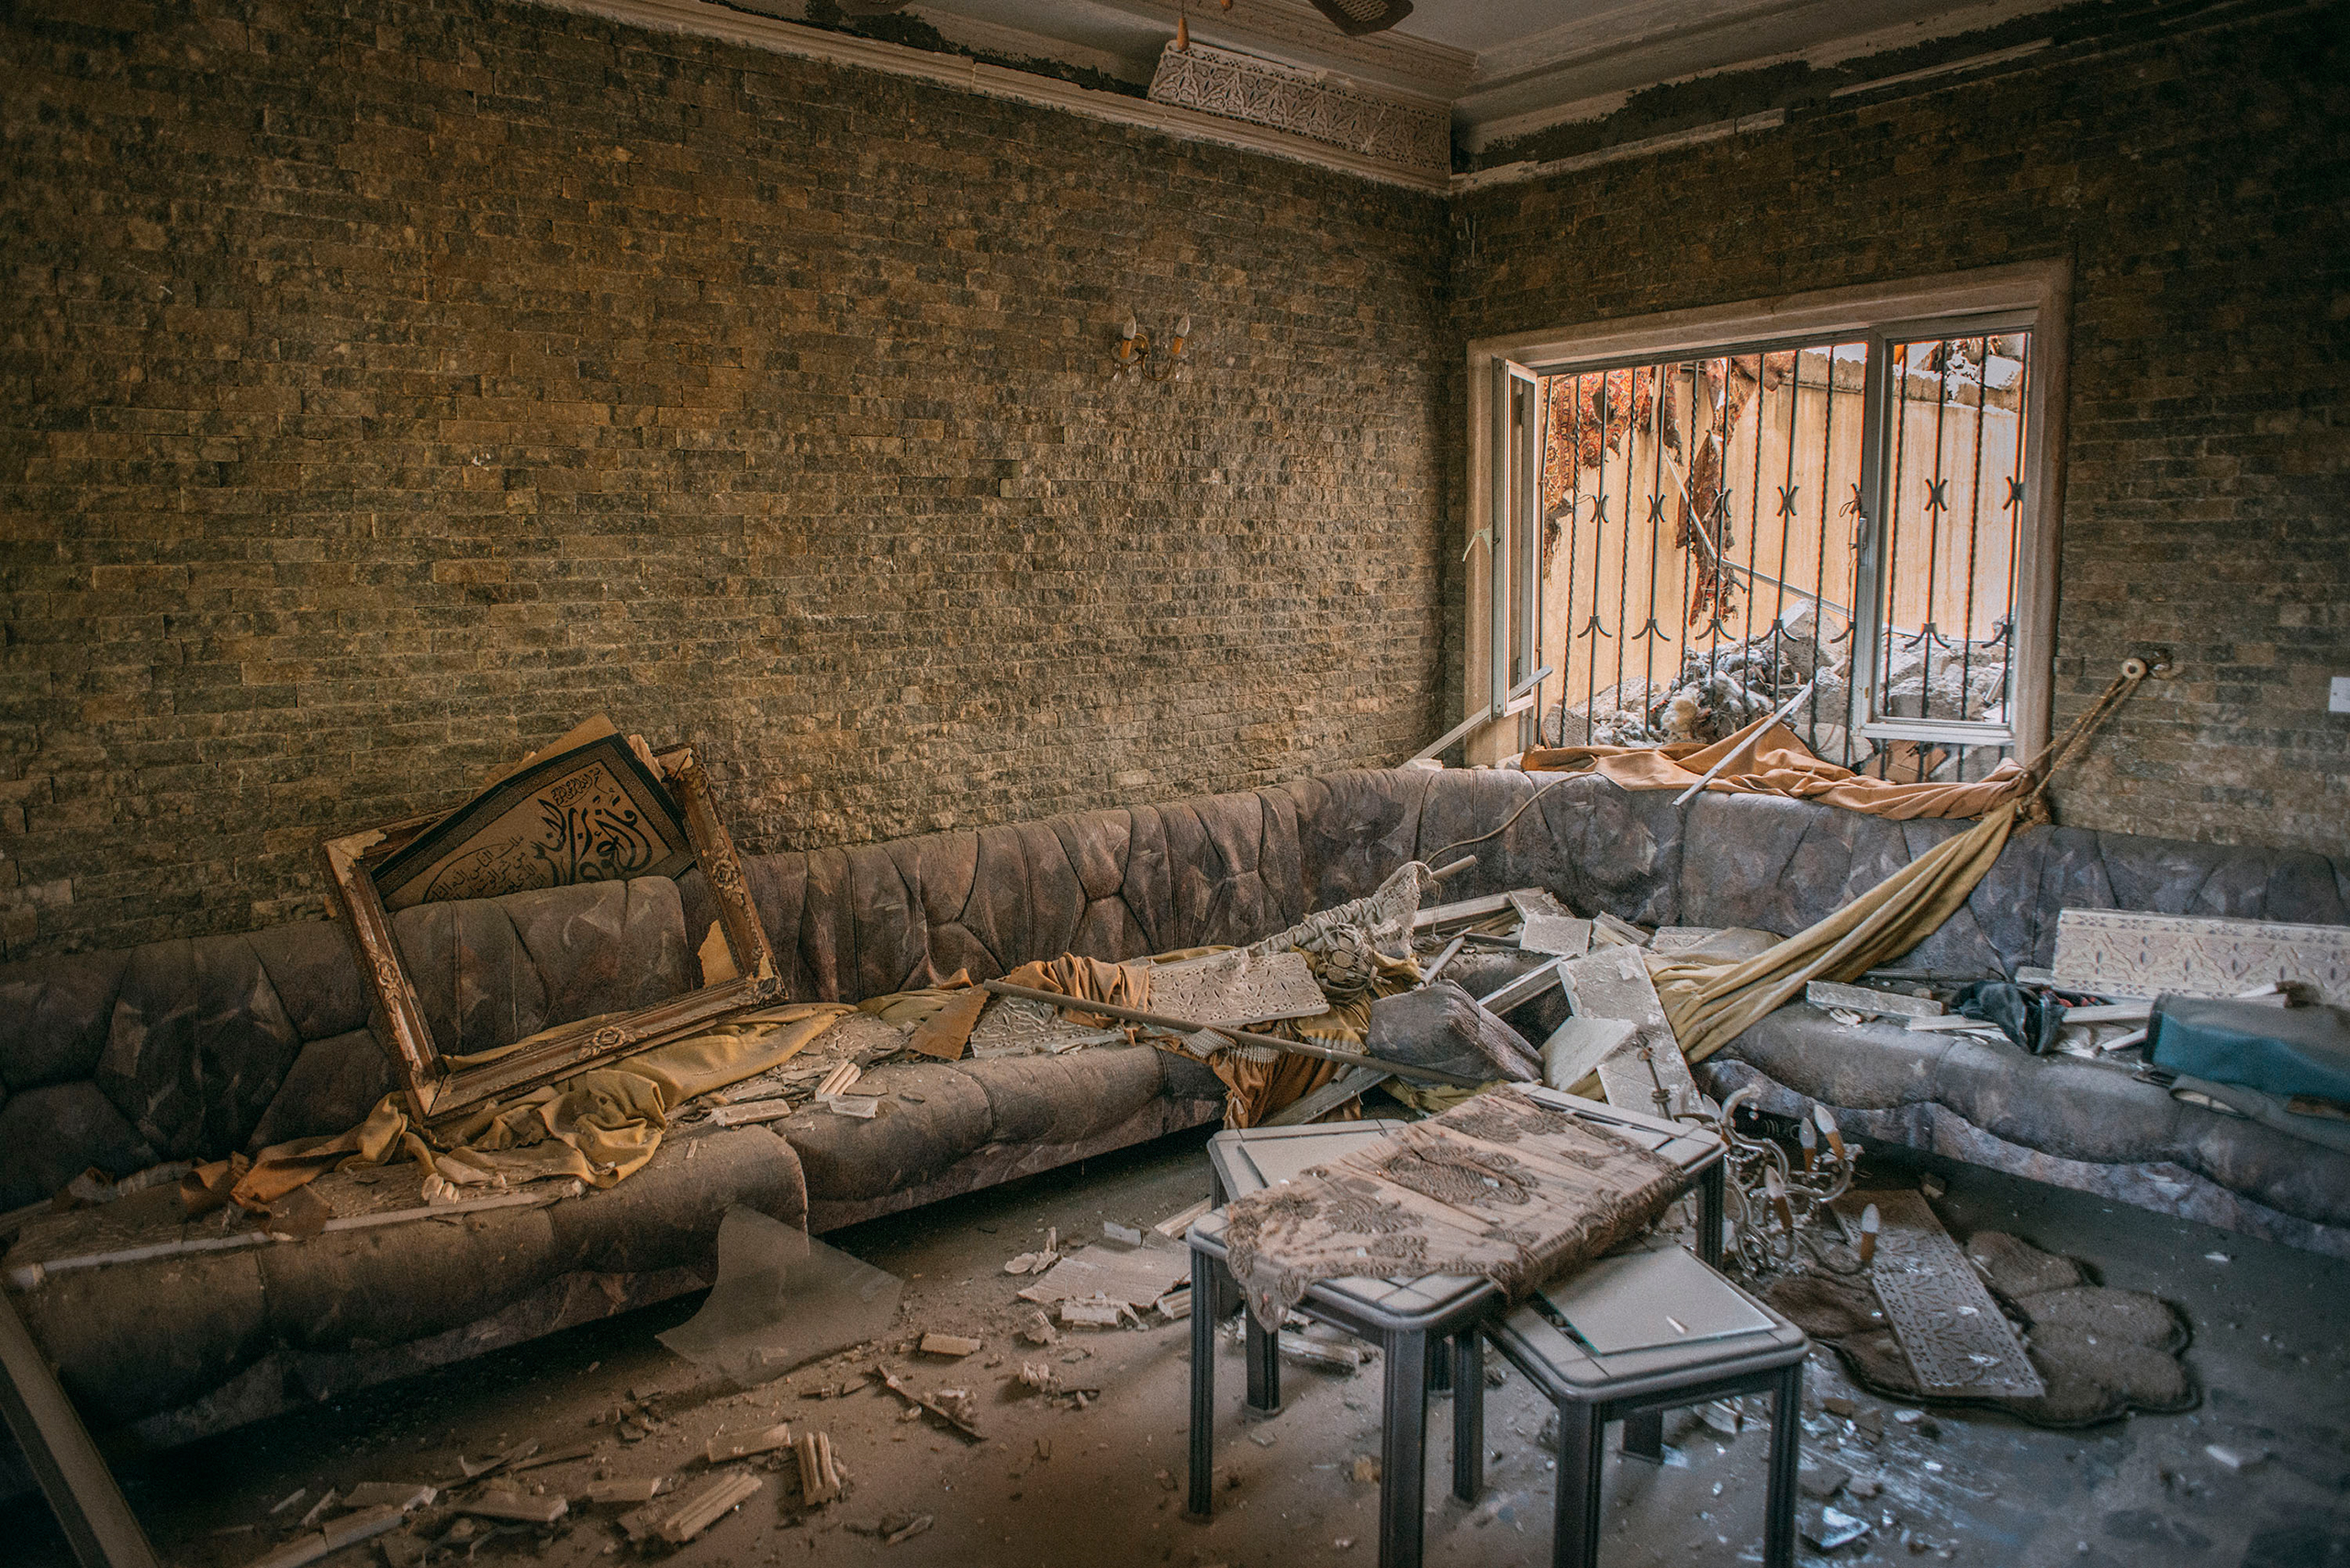 A room inside the home of Median Hikmat al-Galou that was ravaged during a February battle between Iraqi forces and ISIS in southwest Mosul. (Emanuele Satolli for TIME)